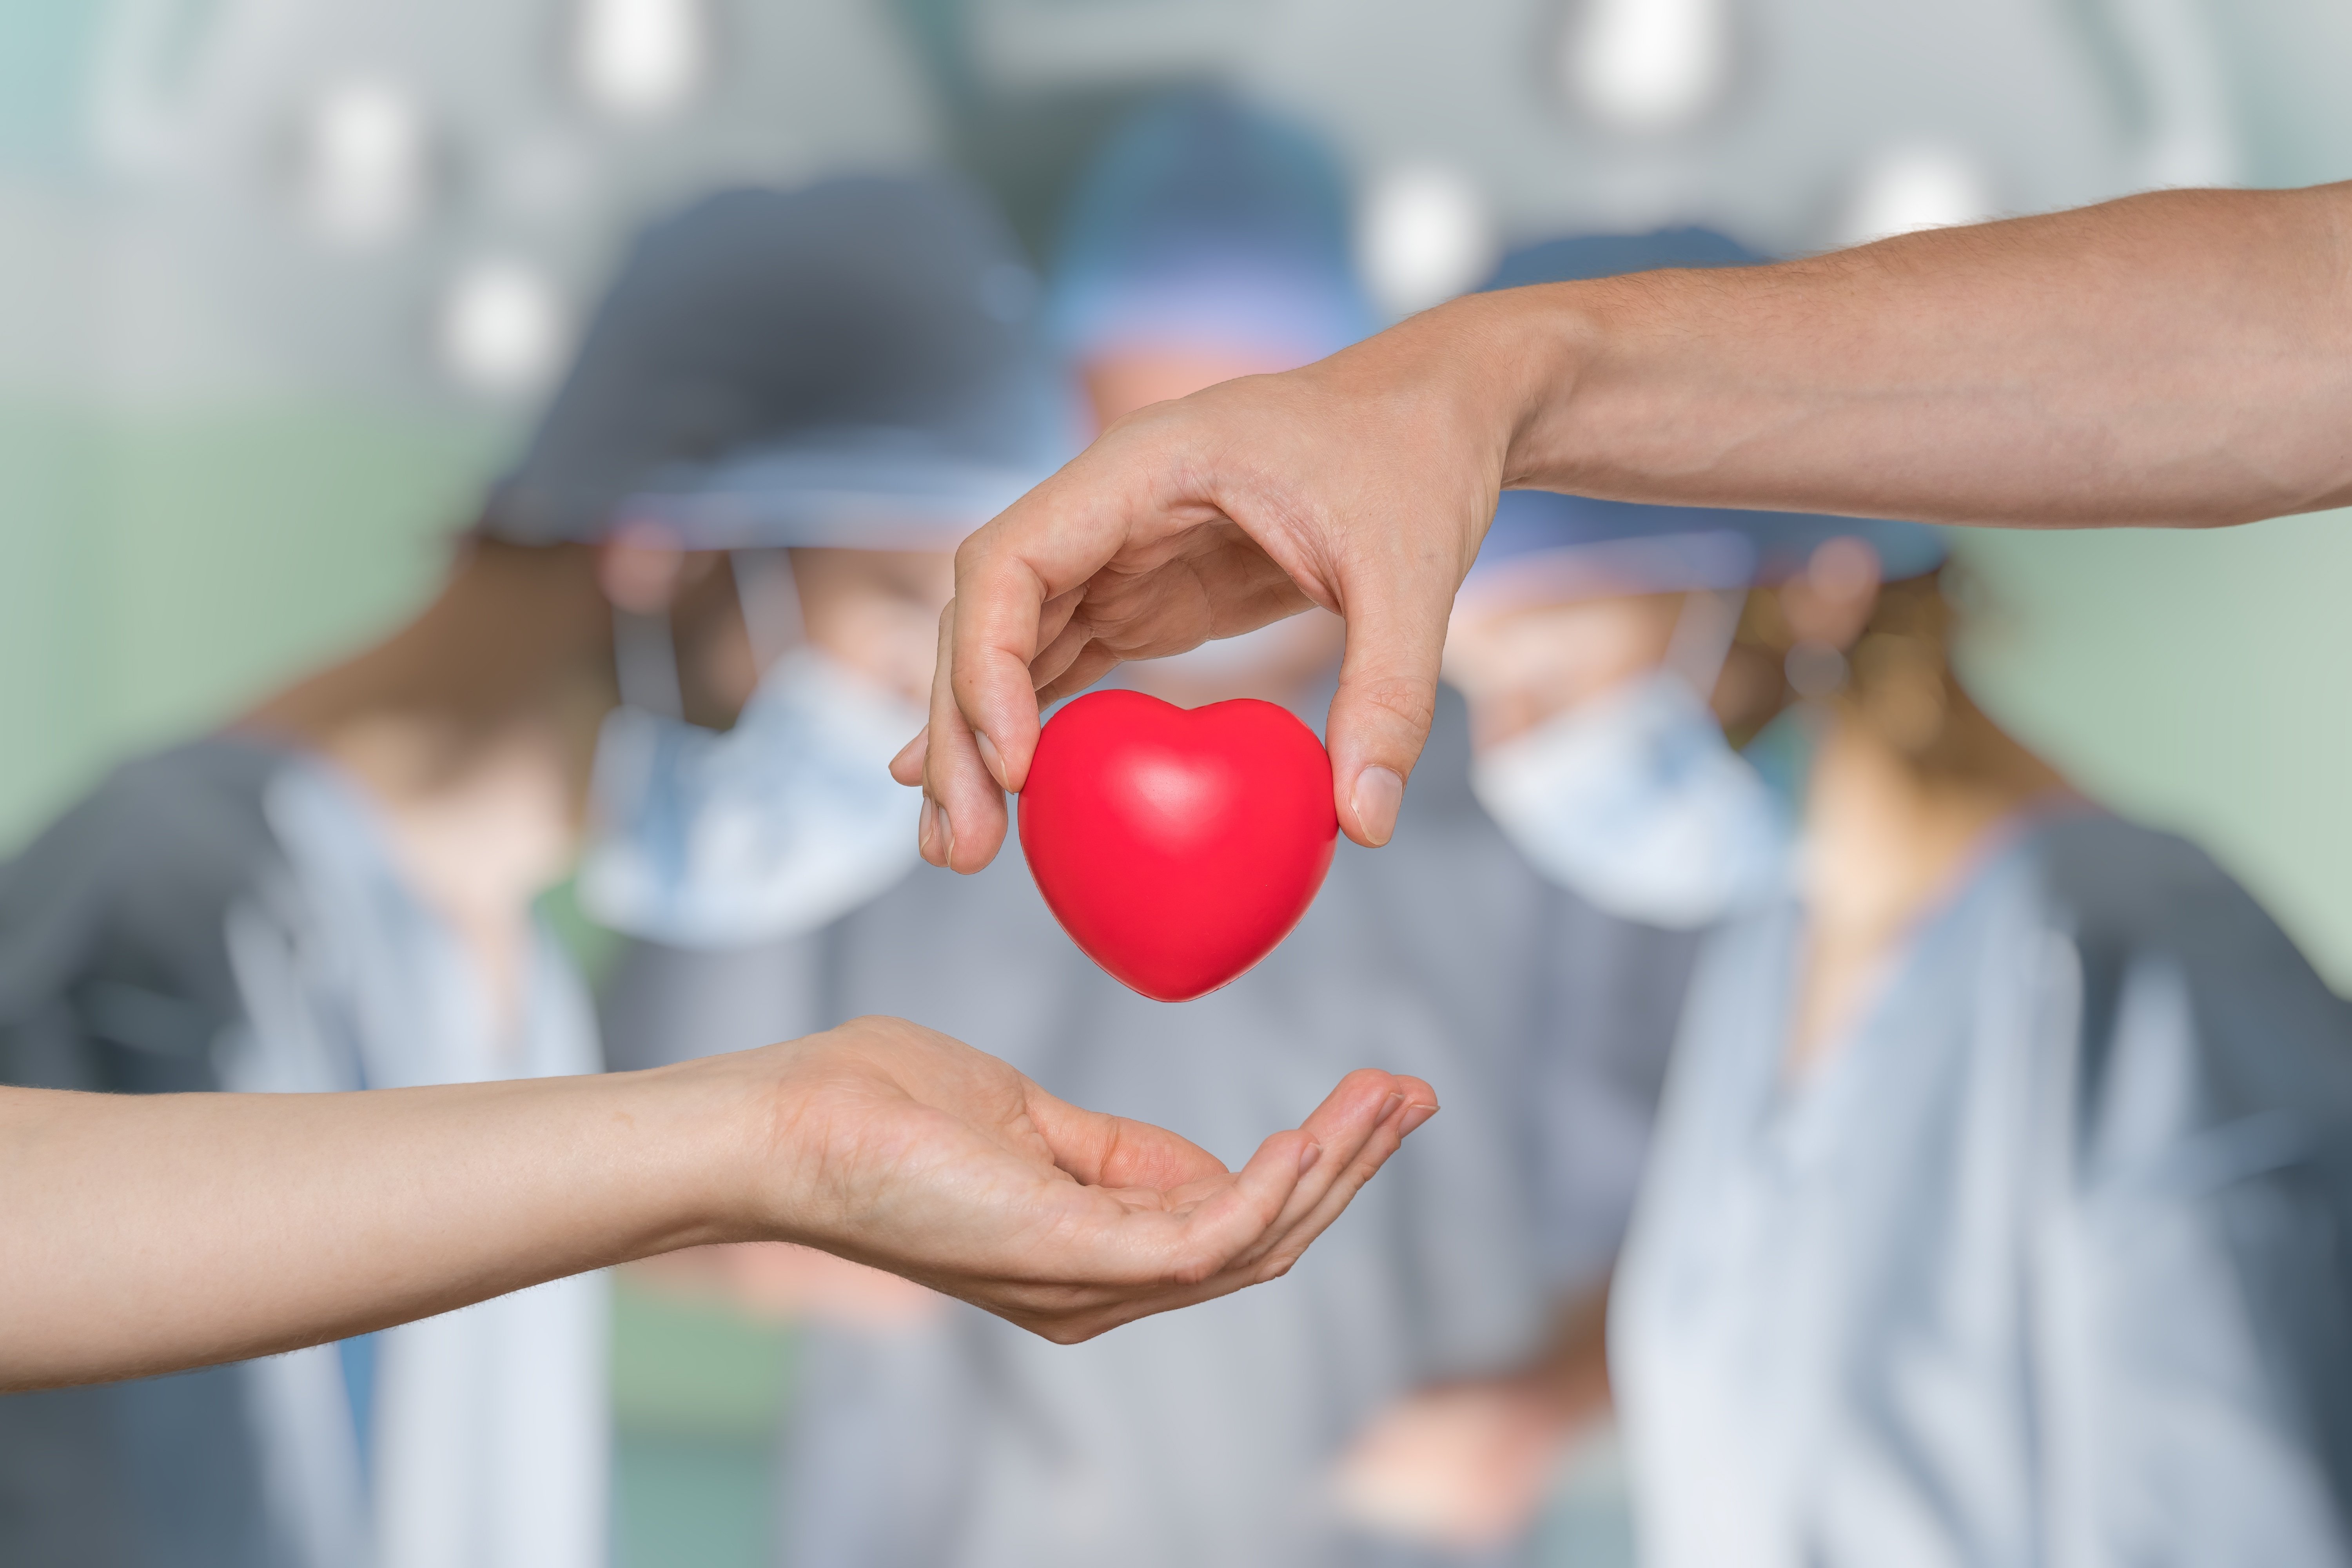 Dispelling The Biggest Organ Donation Myth In Honor of National DMV Appreciation Month